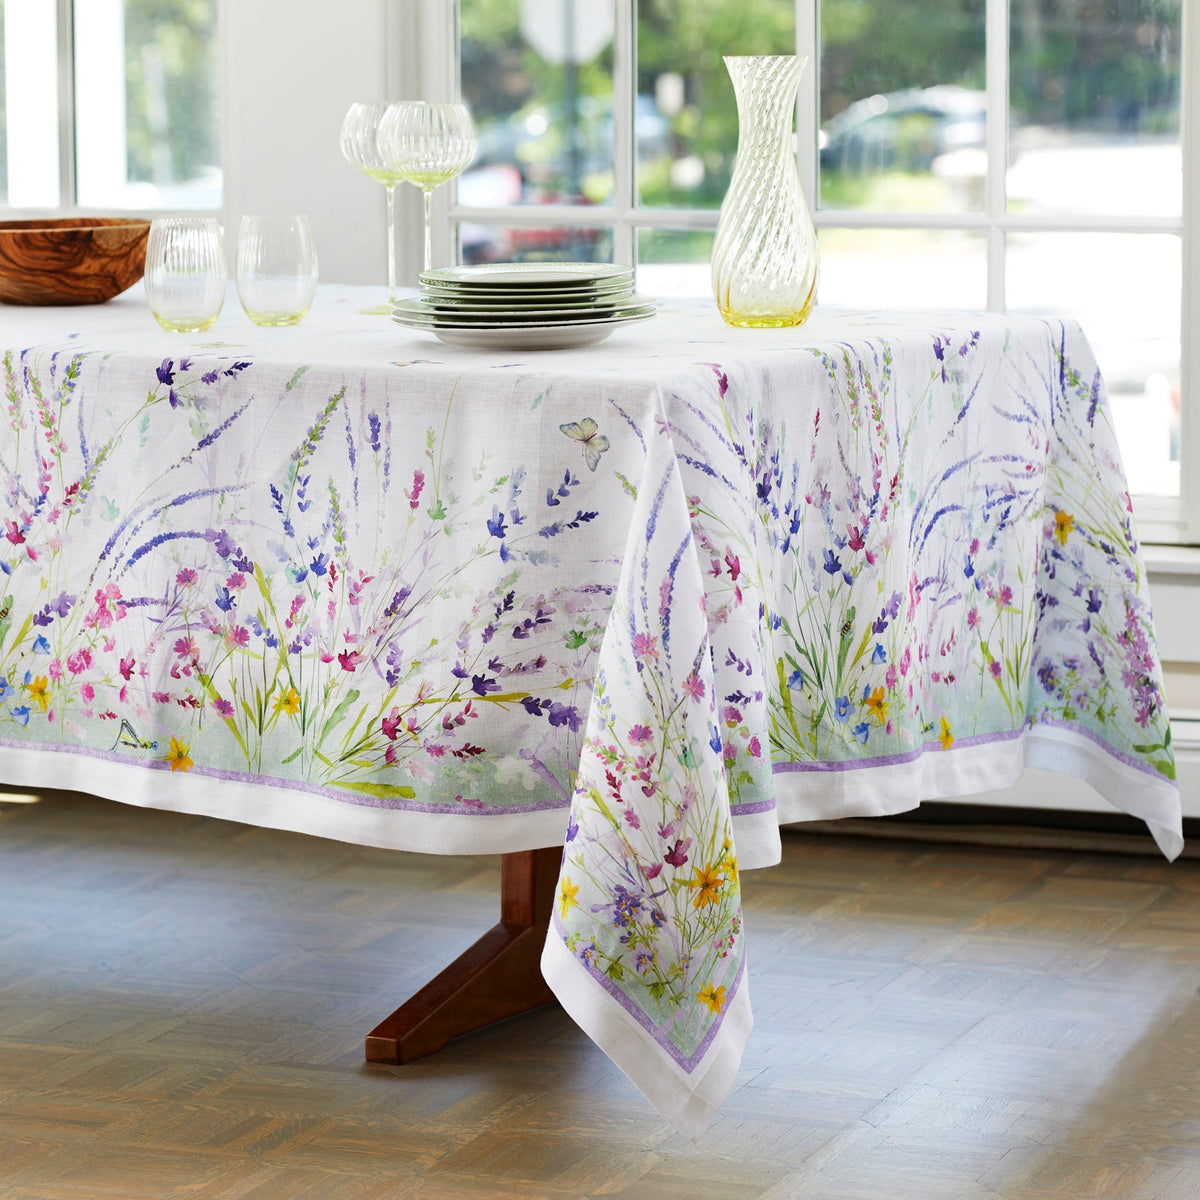 Meadow Tablecloth in 67&quot; x 106&quot; size features hand-painted floral watercolors in shades of blue, purple and green on Italian linen, from Caskata